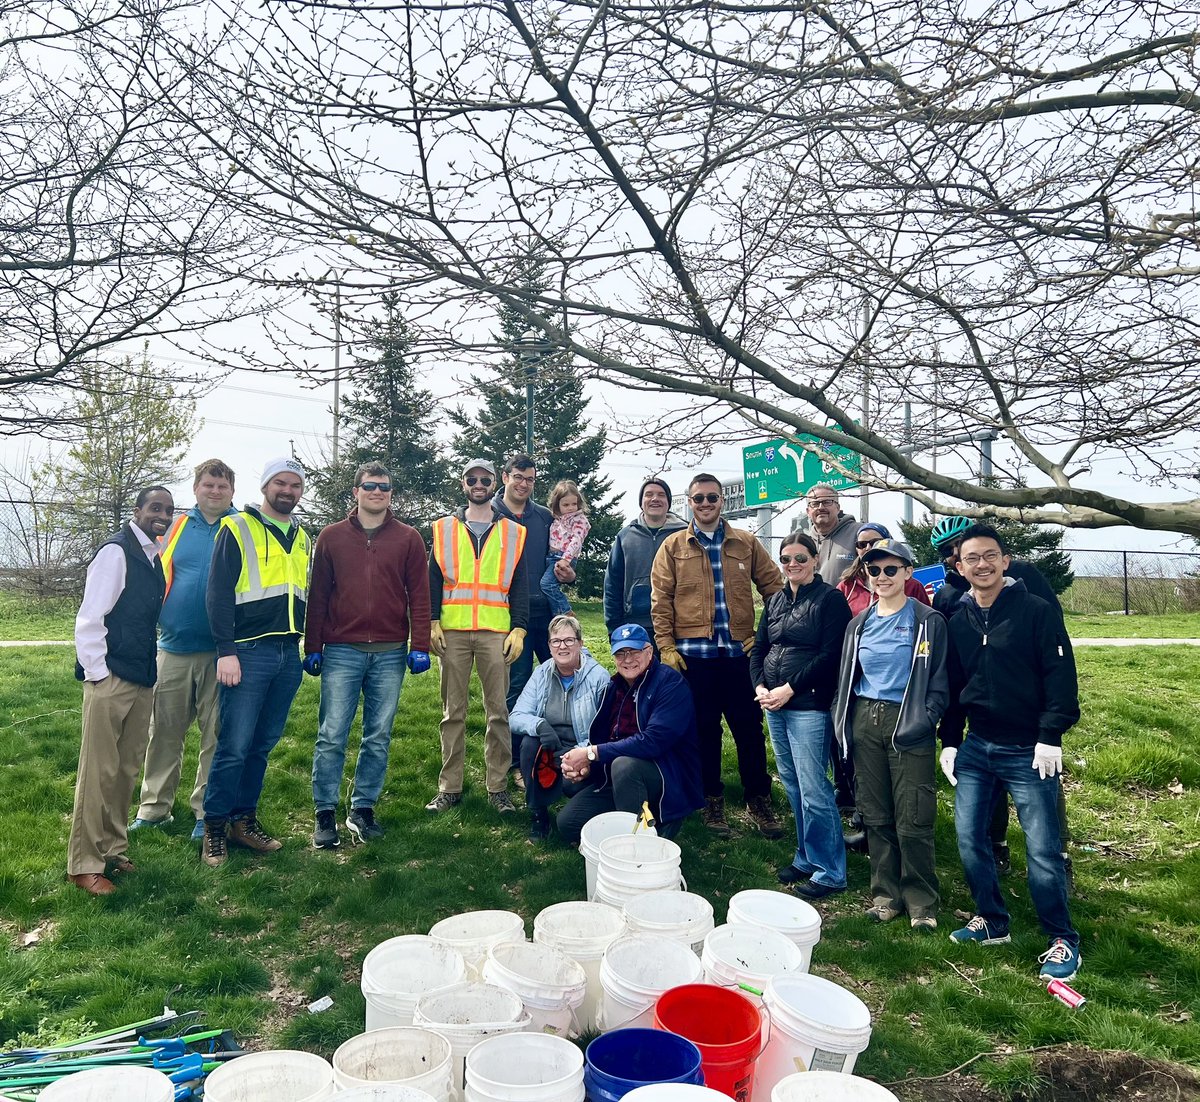 Huge thanks to everyone who joined today's neighborhood cleanup on George M. Cohan Blvd in Fox Point! Together, we collected heaps of trash, making our community a cleaner place. Thank you for helping to beauty our neighborhood.